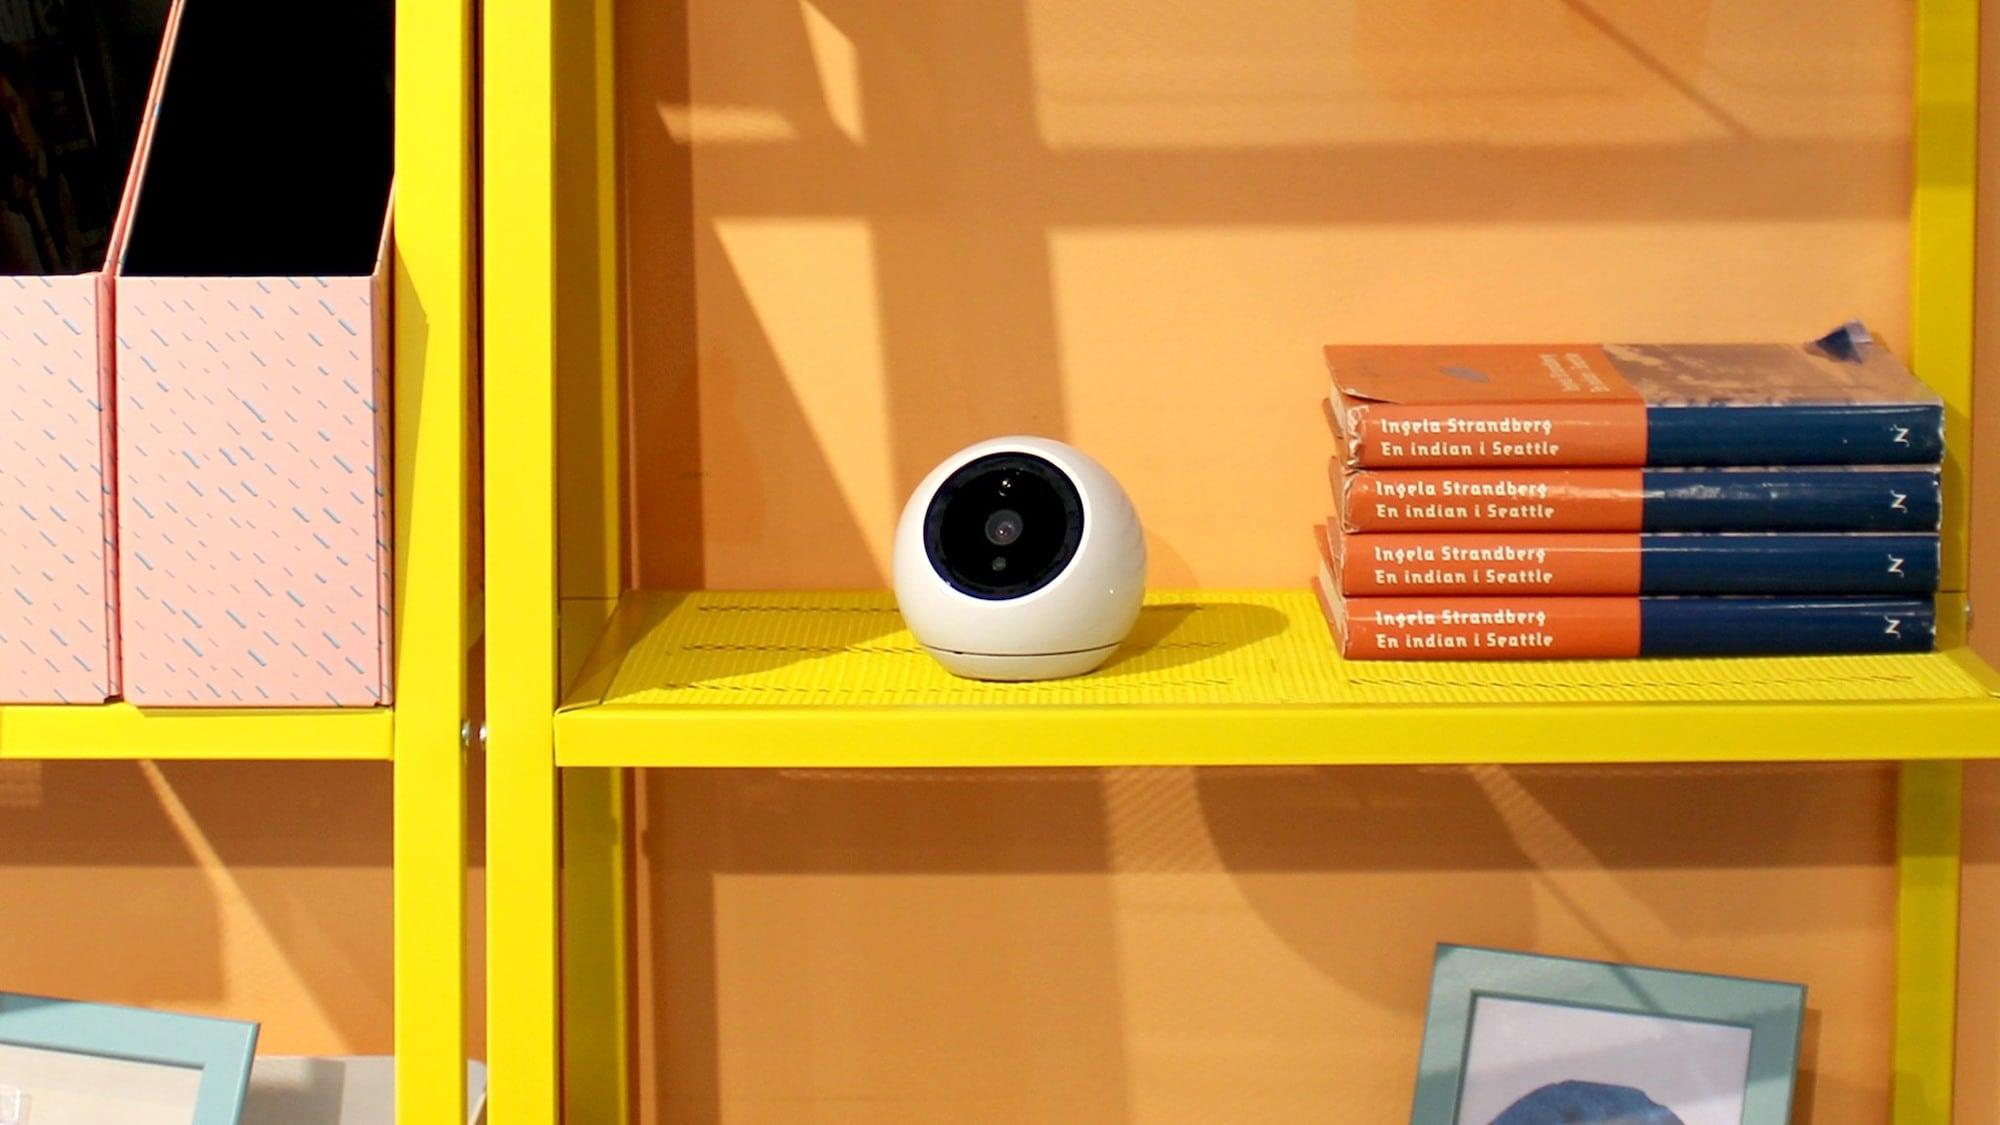 Image for This biometric security camera detects faces and intruders » Gadget Flow